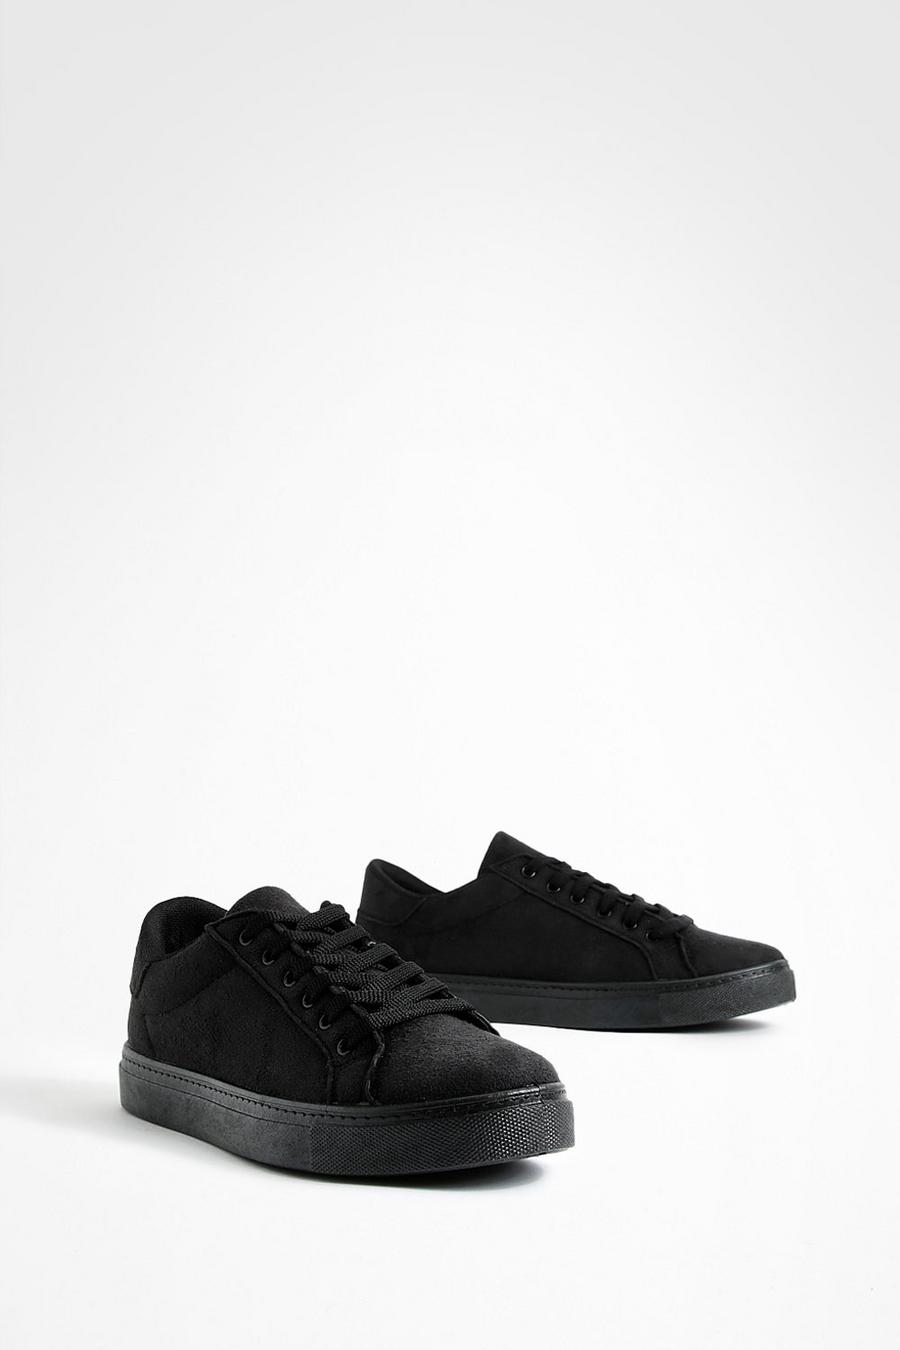 Black Faux Suede Basic Flat Sneakers